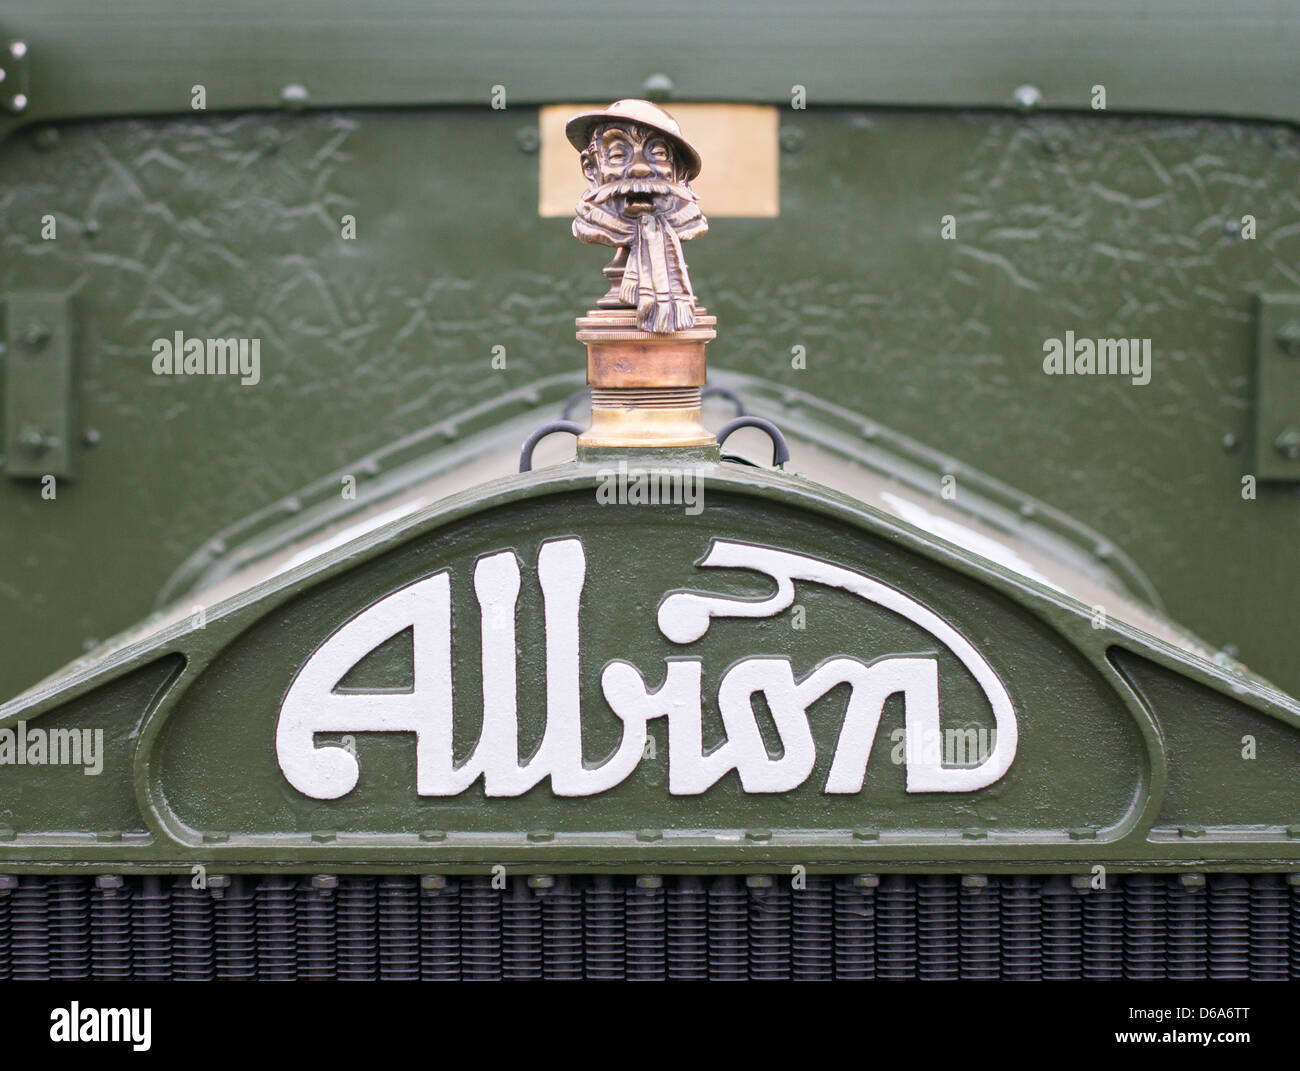 Ex WD 1916 Albion truck with Bruce Bairnsfather bronze 'Old Bill' bonnet ornament Beamish Museum north east England UK Stock Photo